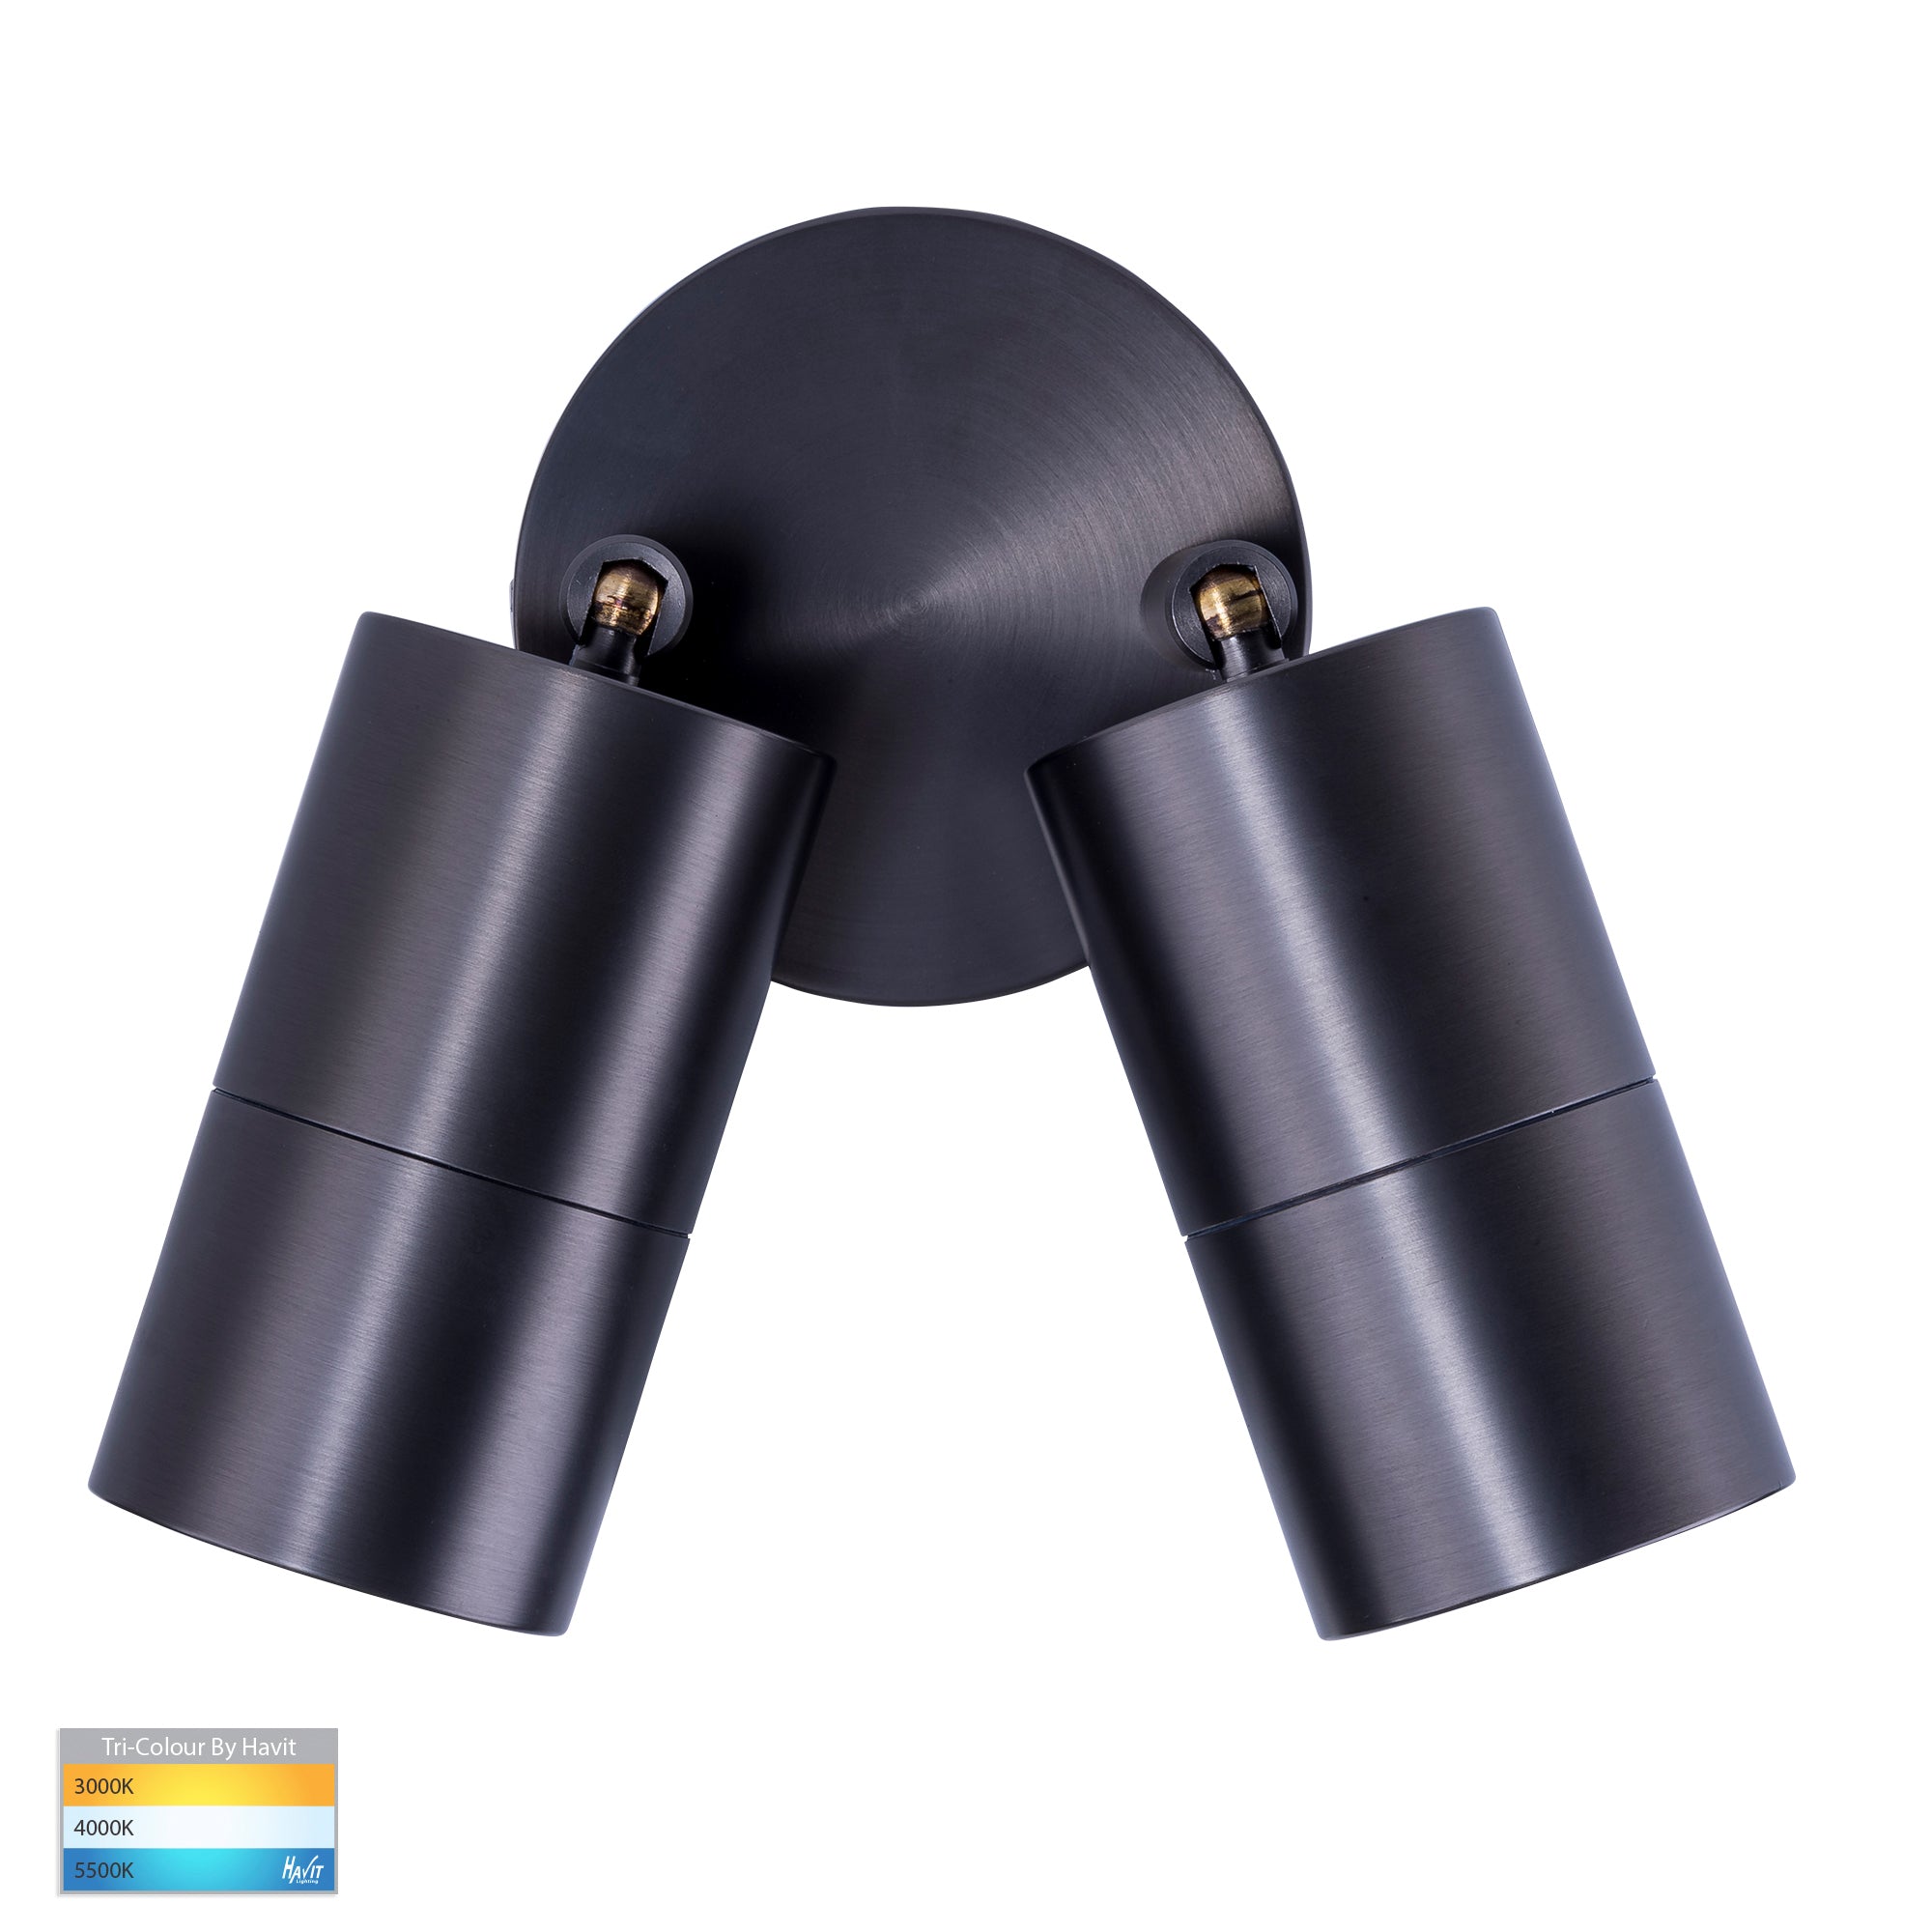 HV1375T-HV1377T - Tivah Solid Brass Graphite Coloured TRI Colour Double Adjustable Wall Pillar Lights